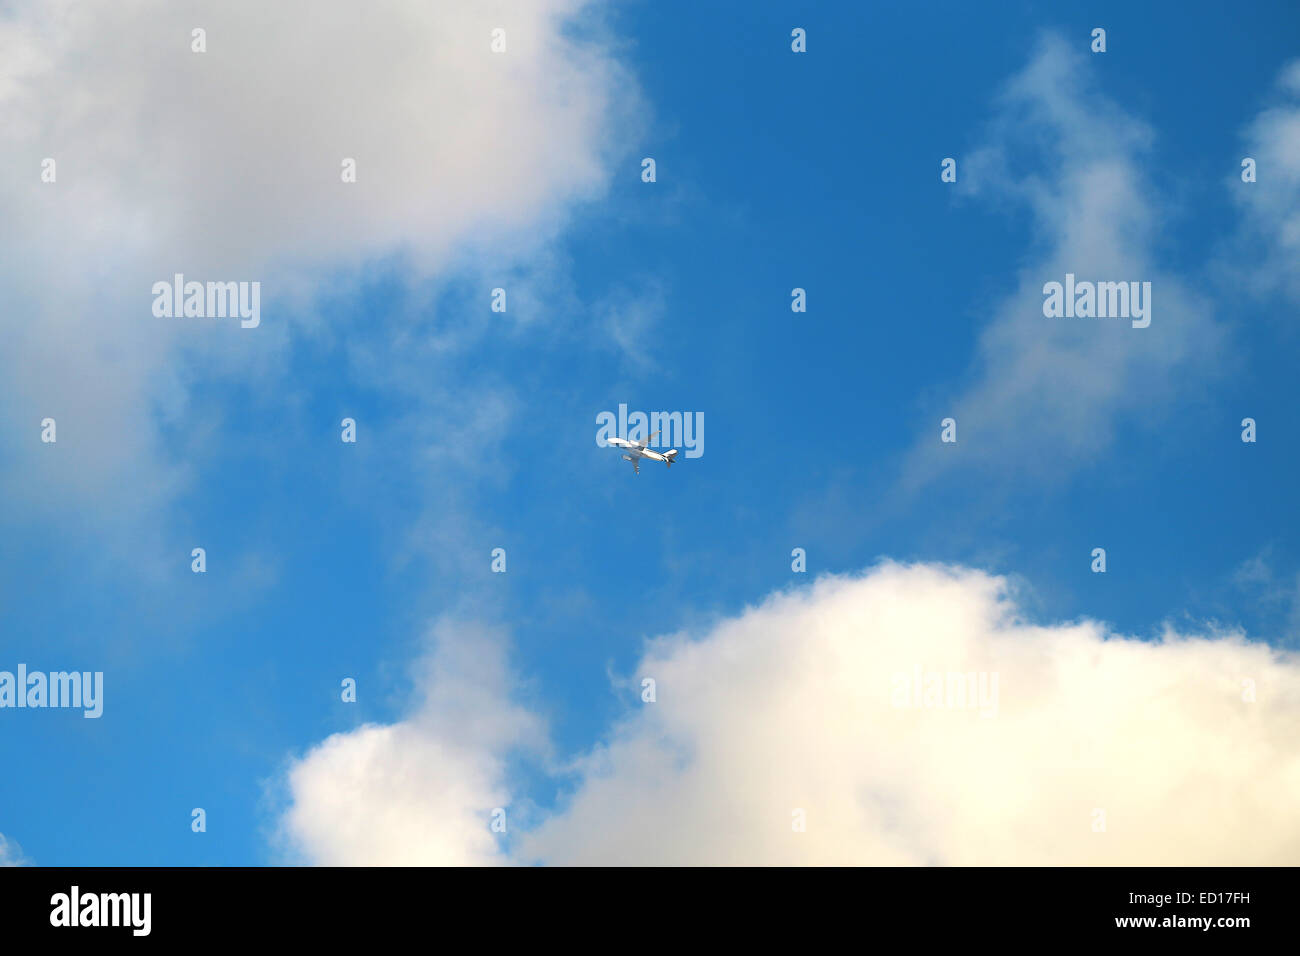 photo bright sky with clouds and aircraft Stock Photo